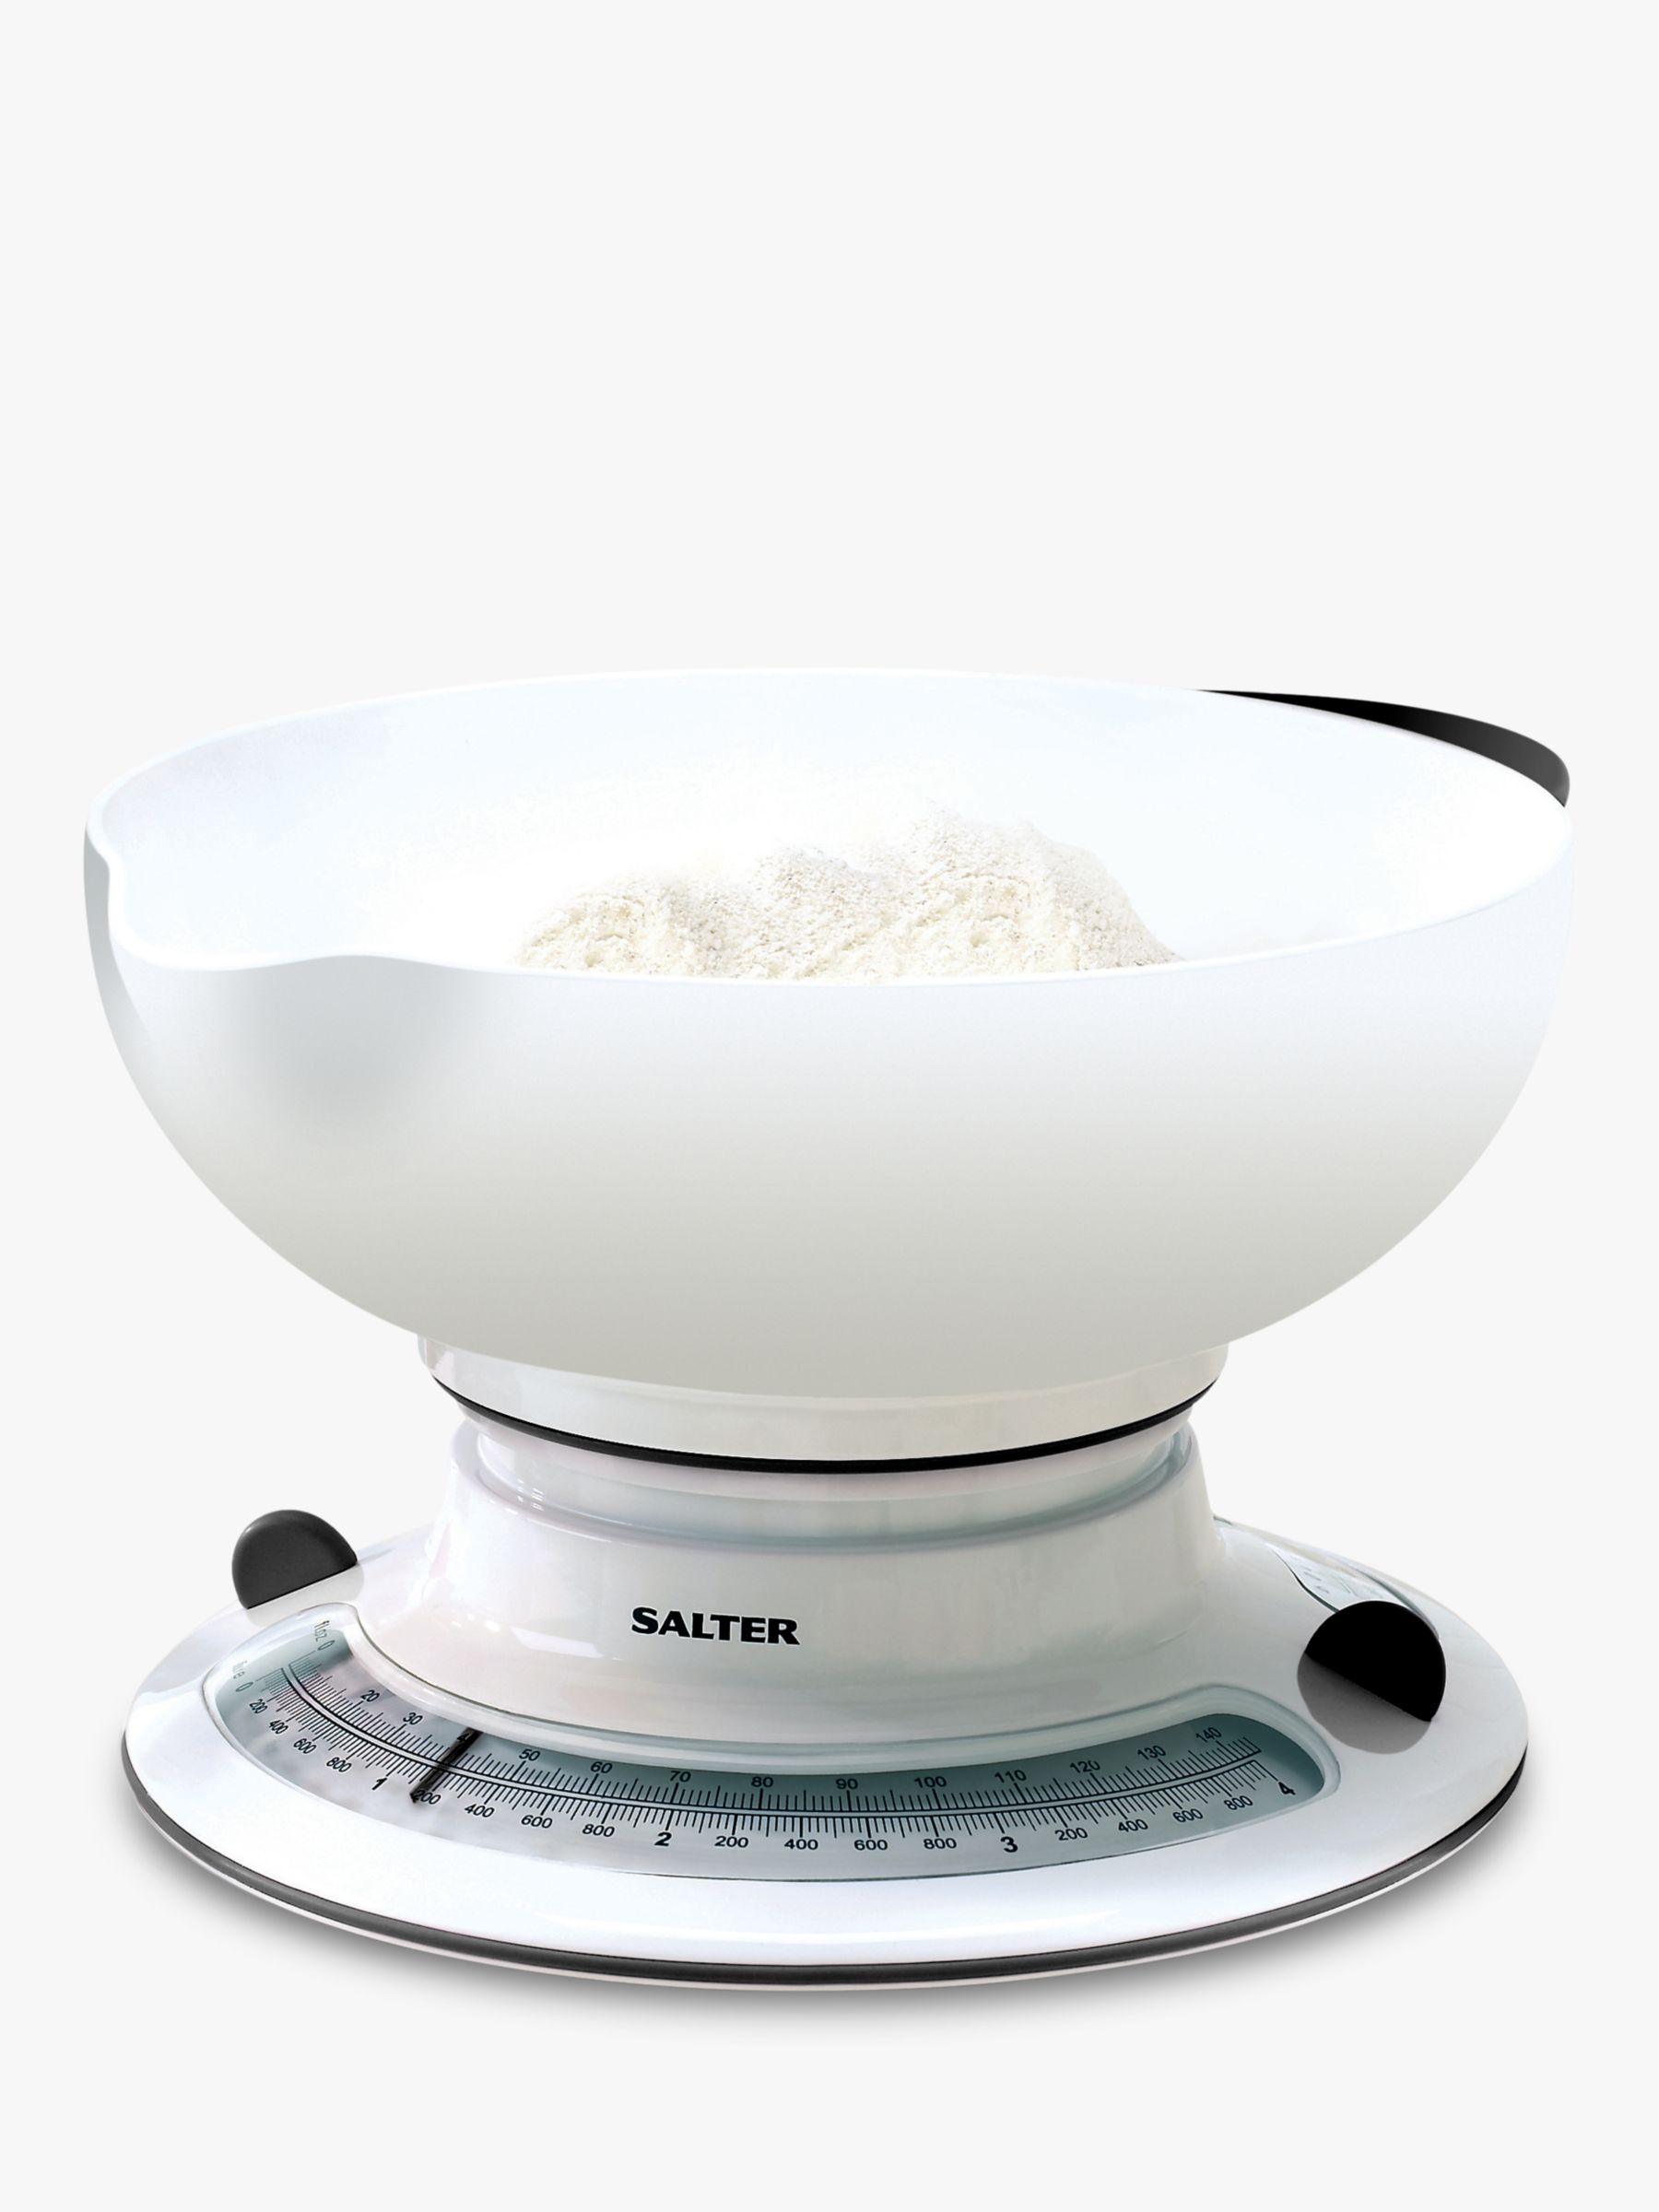 Photo of Salter aqua weigh mechanical kitchen scale & bowl 4kg